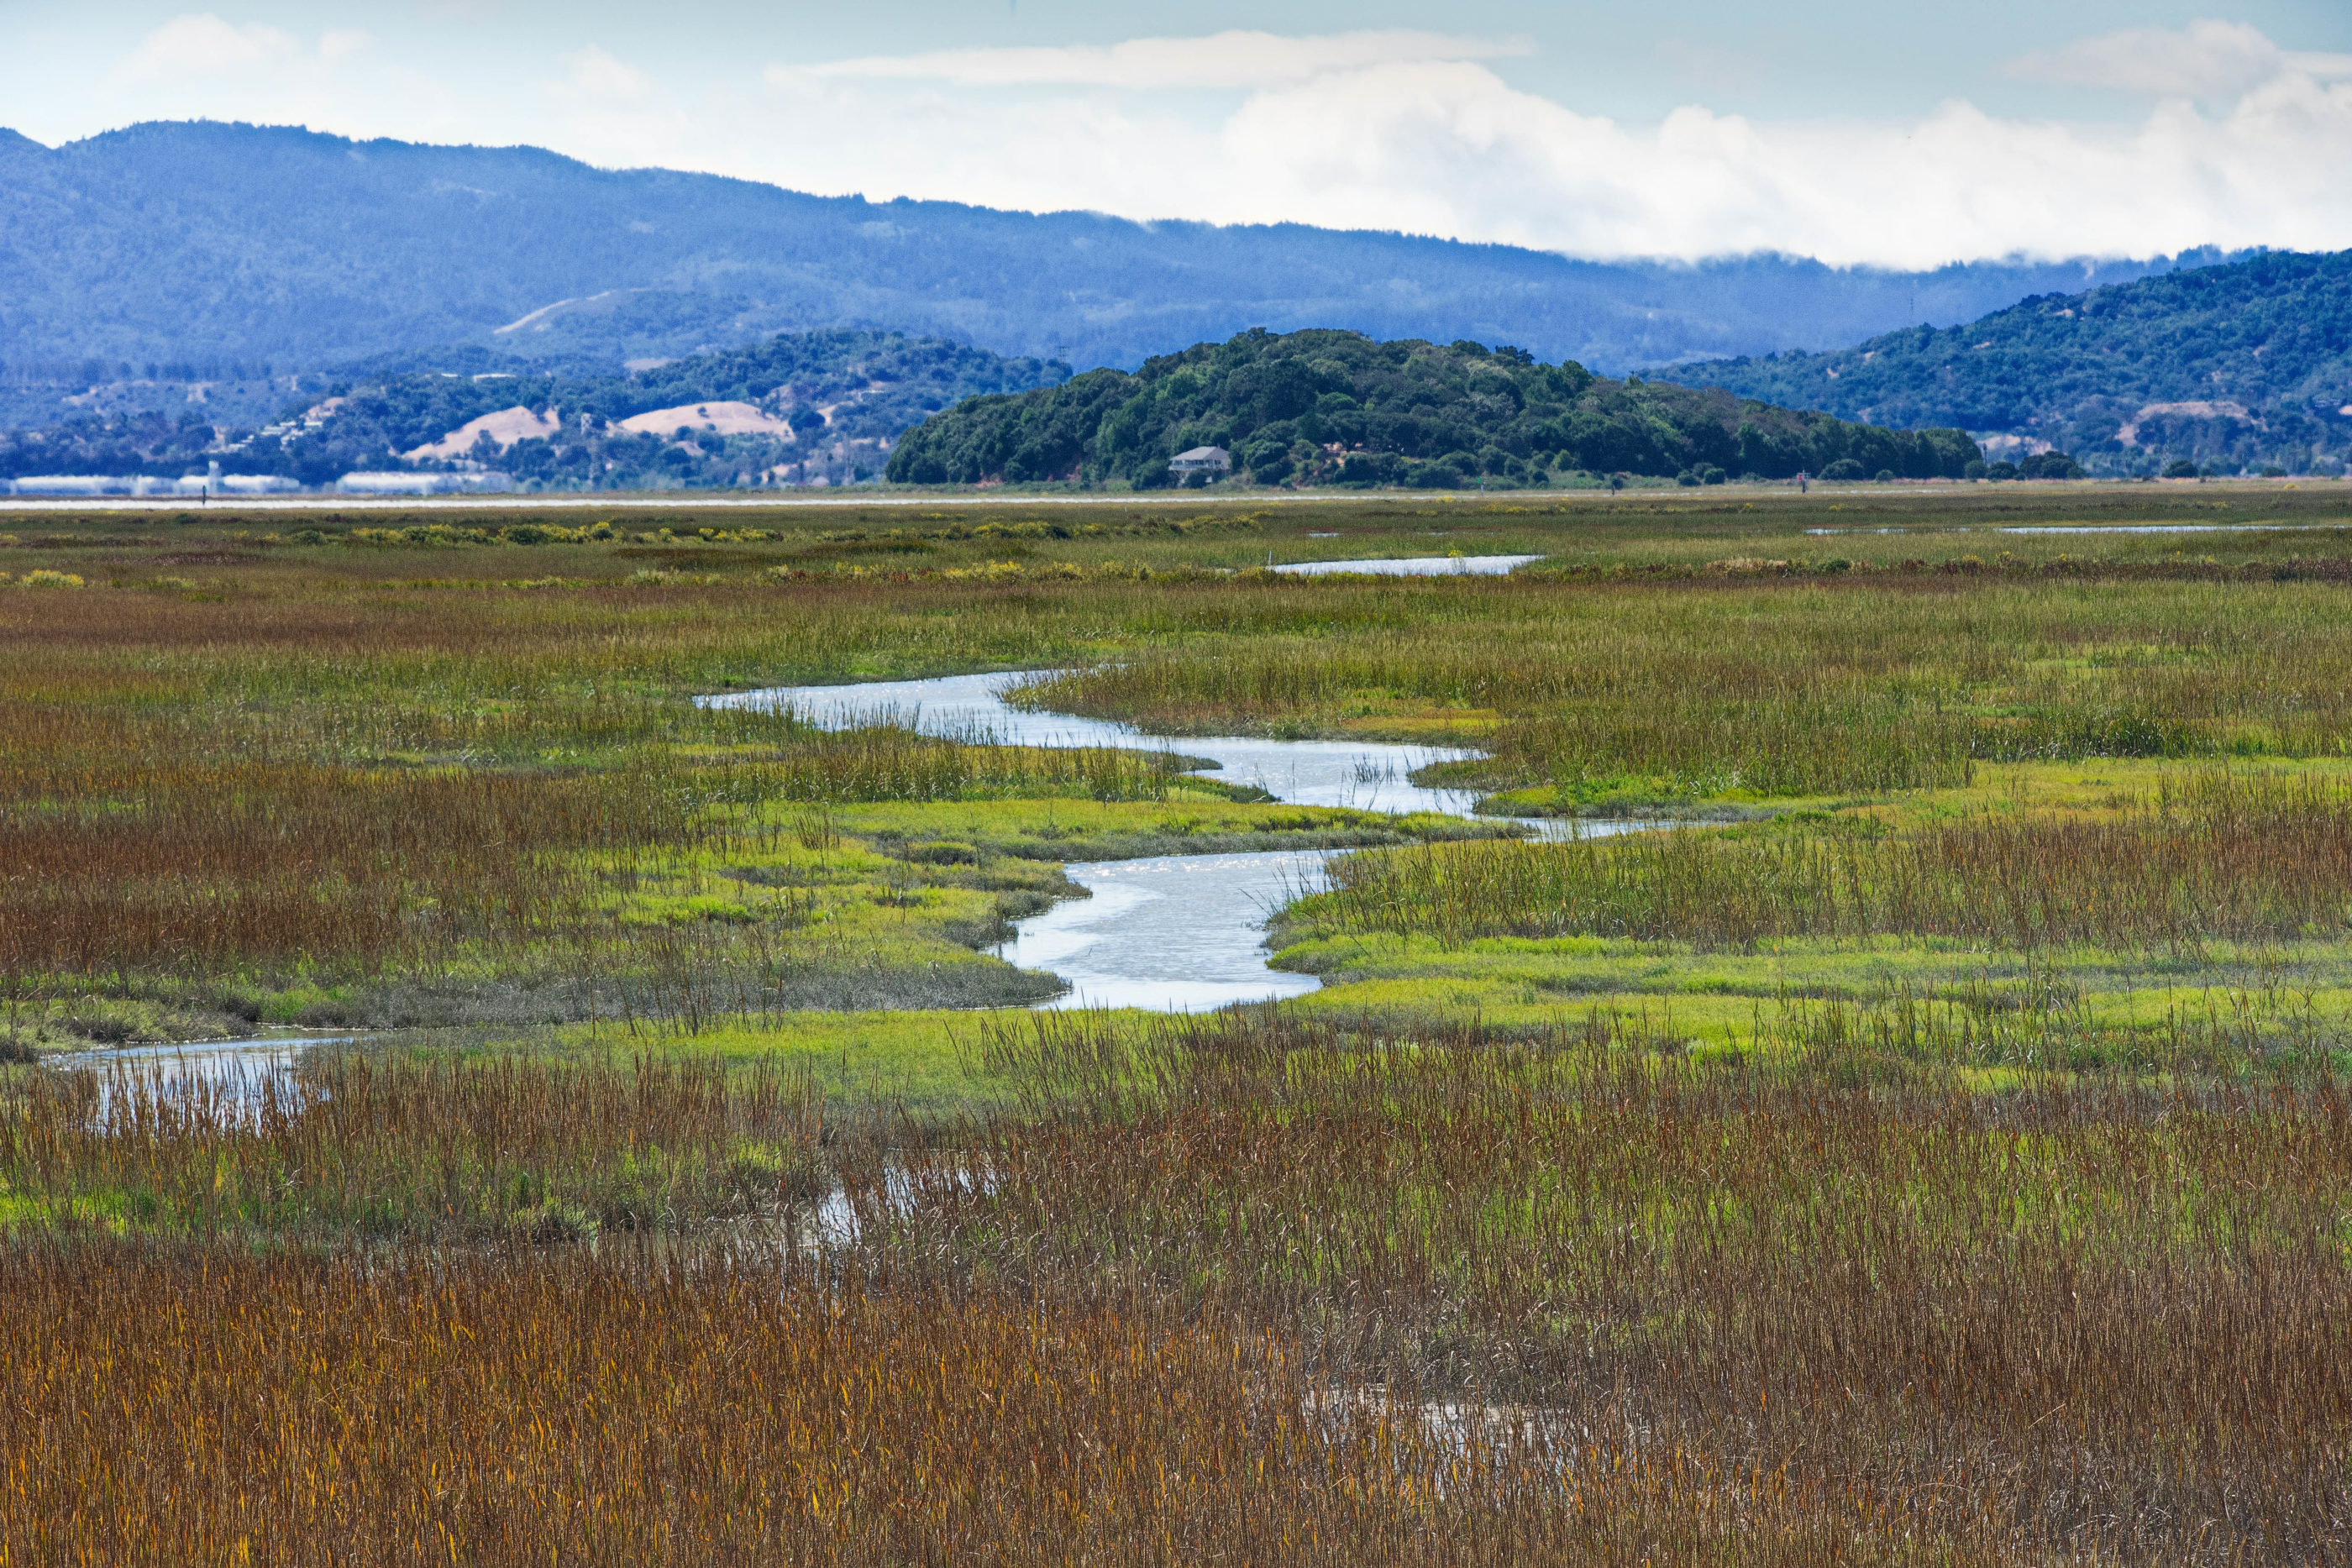 Lush wetland with mountains in the background